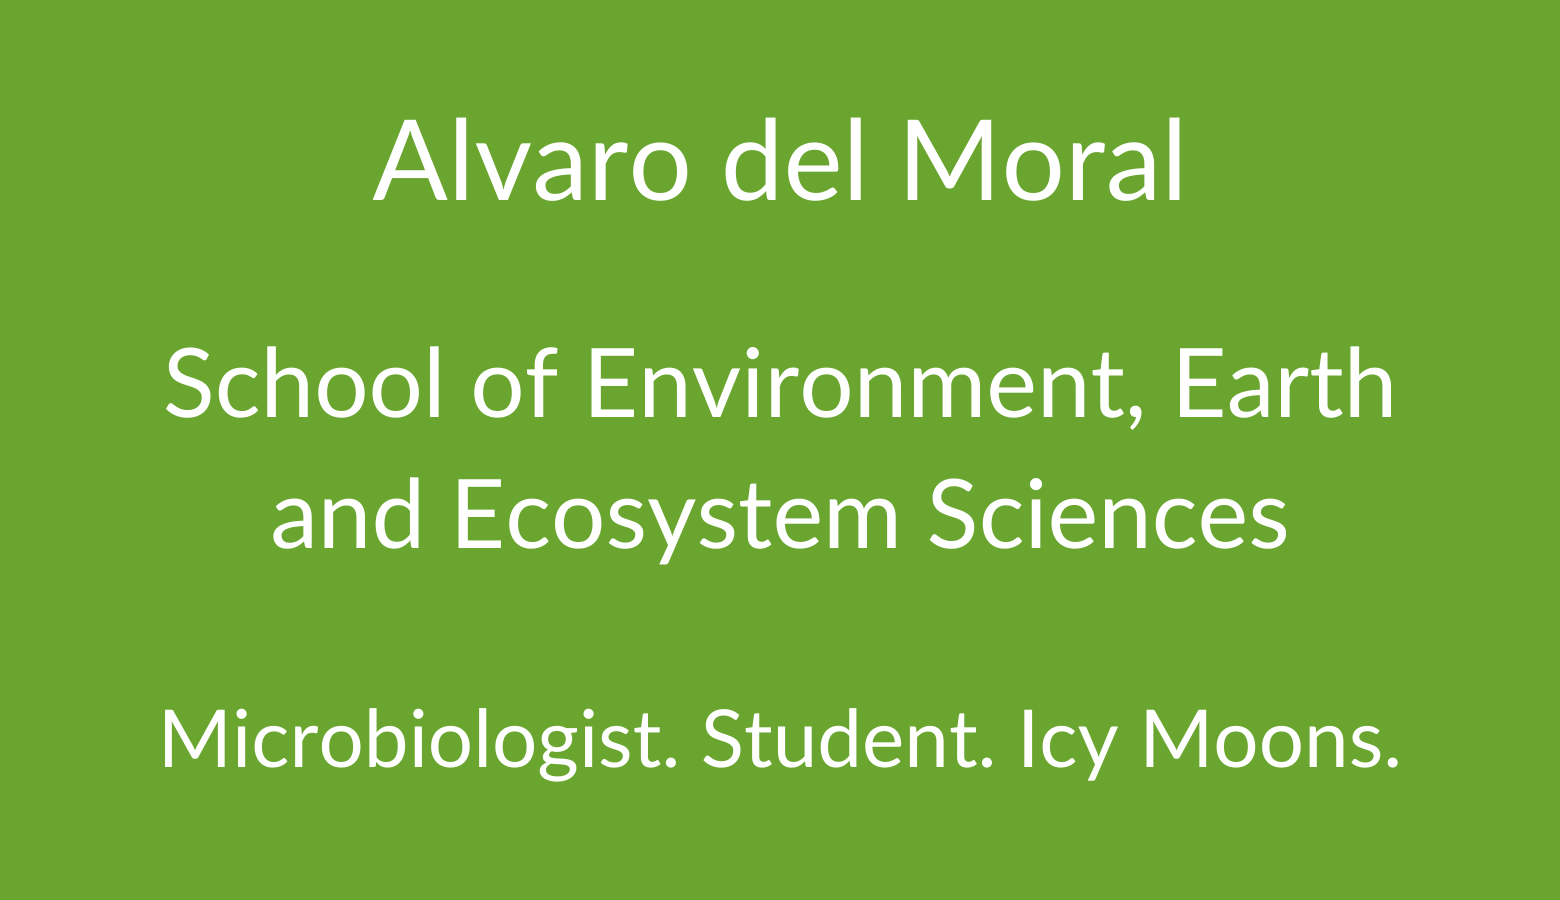 Alvaro del Moral. School of Environment, Earth and Ecosystem Sciences. Microbiologist. Student. Icy Moons.